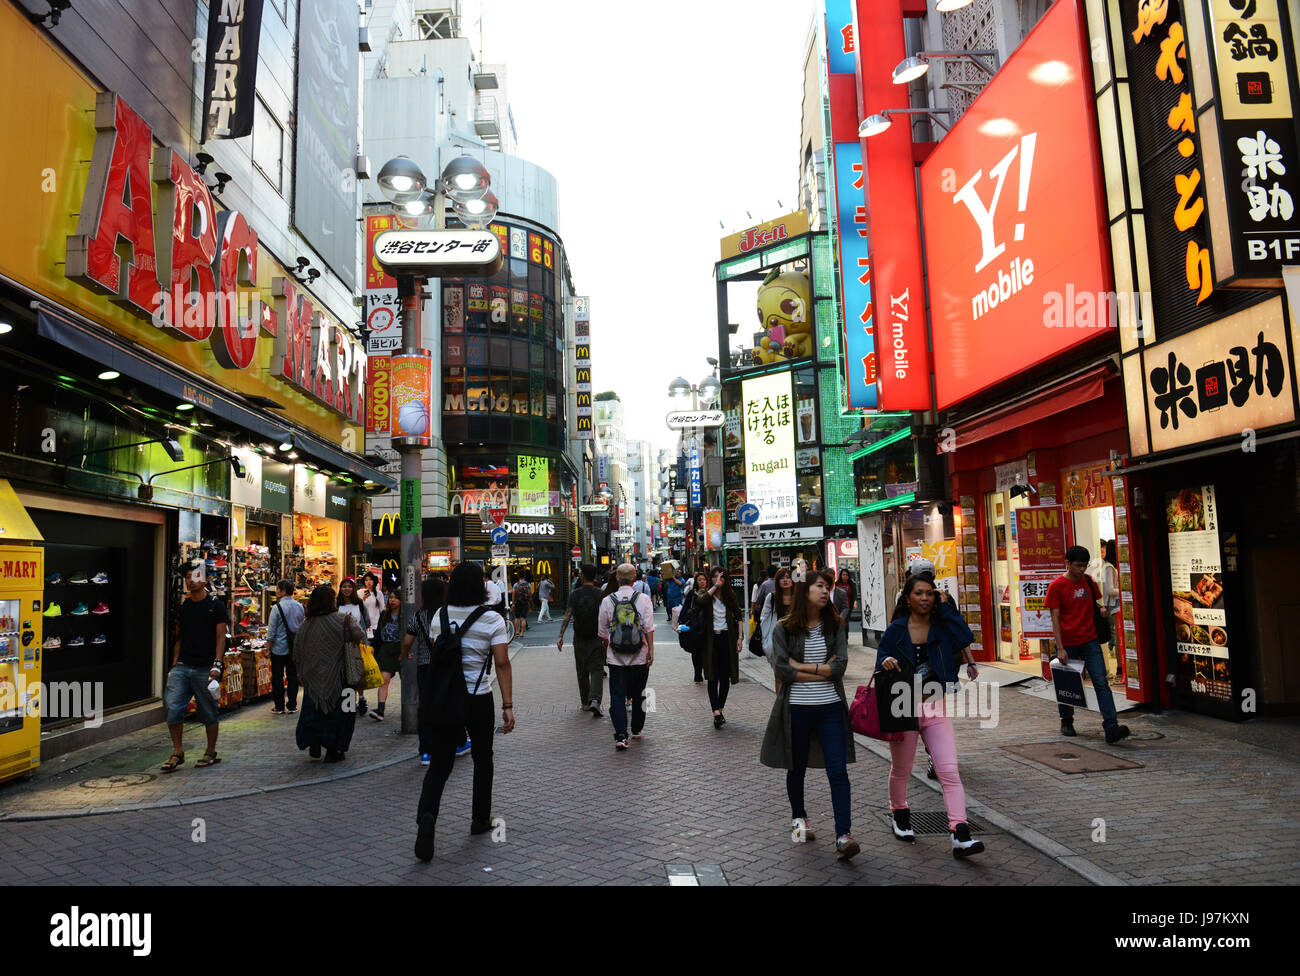 Shibuya is a very popular shopping , entertainment and nightlife area in Tokyo, Japan. Stock Photo